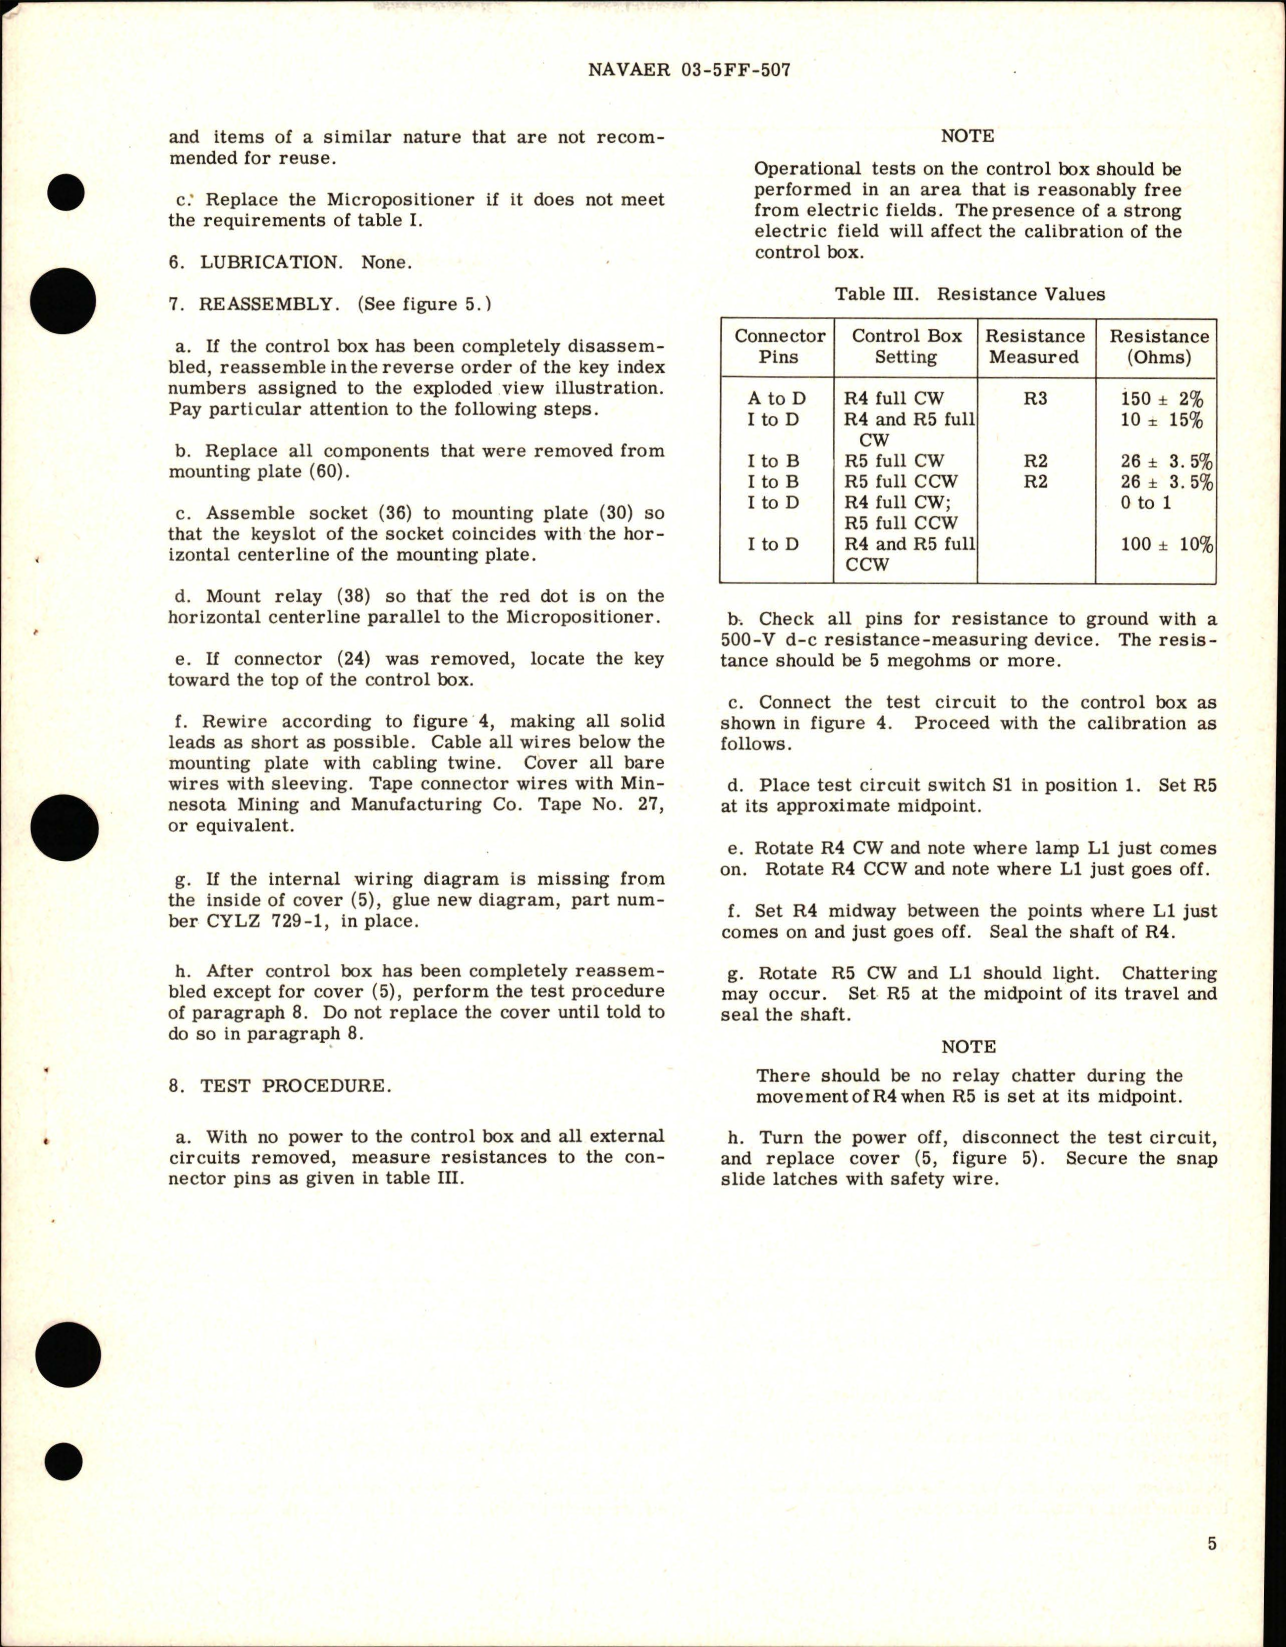 Sample page 5 from AirCorps Library document: Overhaul Instructions with Parts Breakdown for Control Box - CYLZ 3828